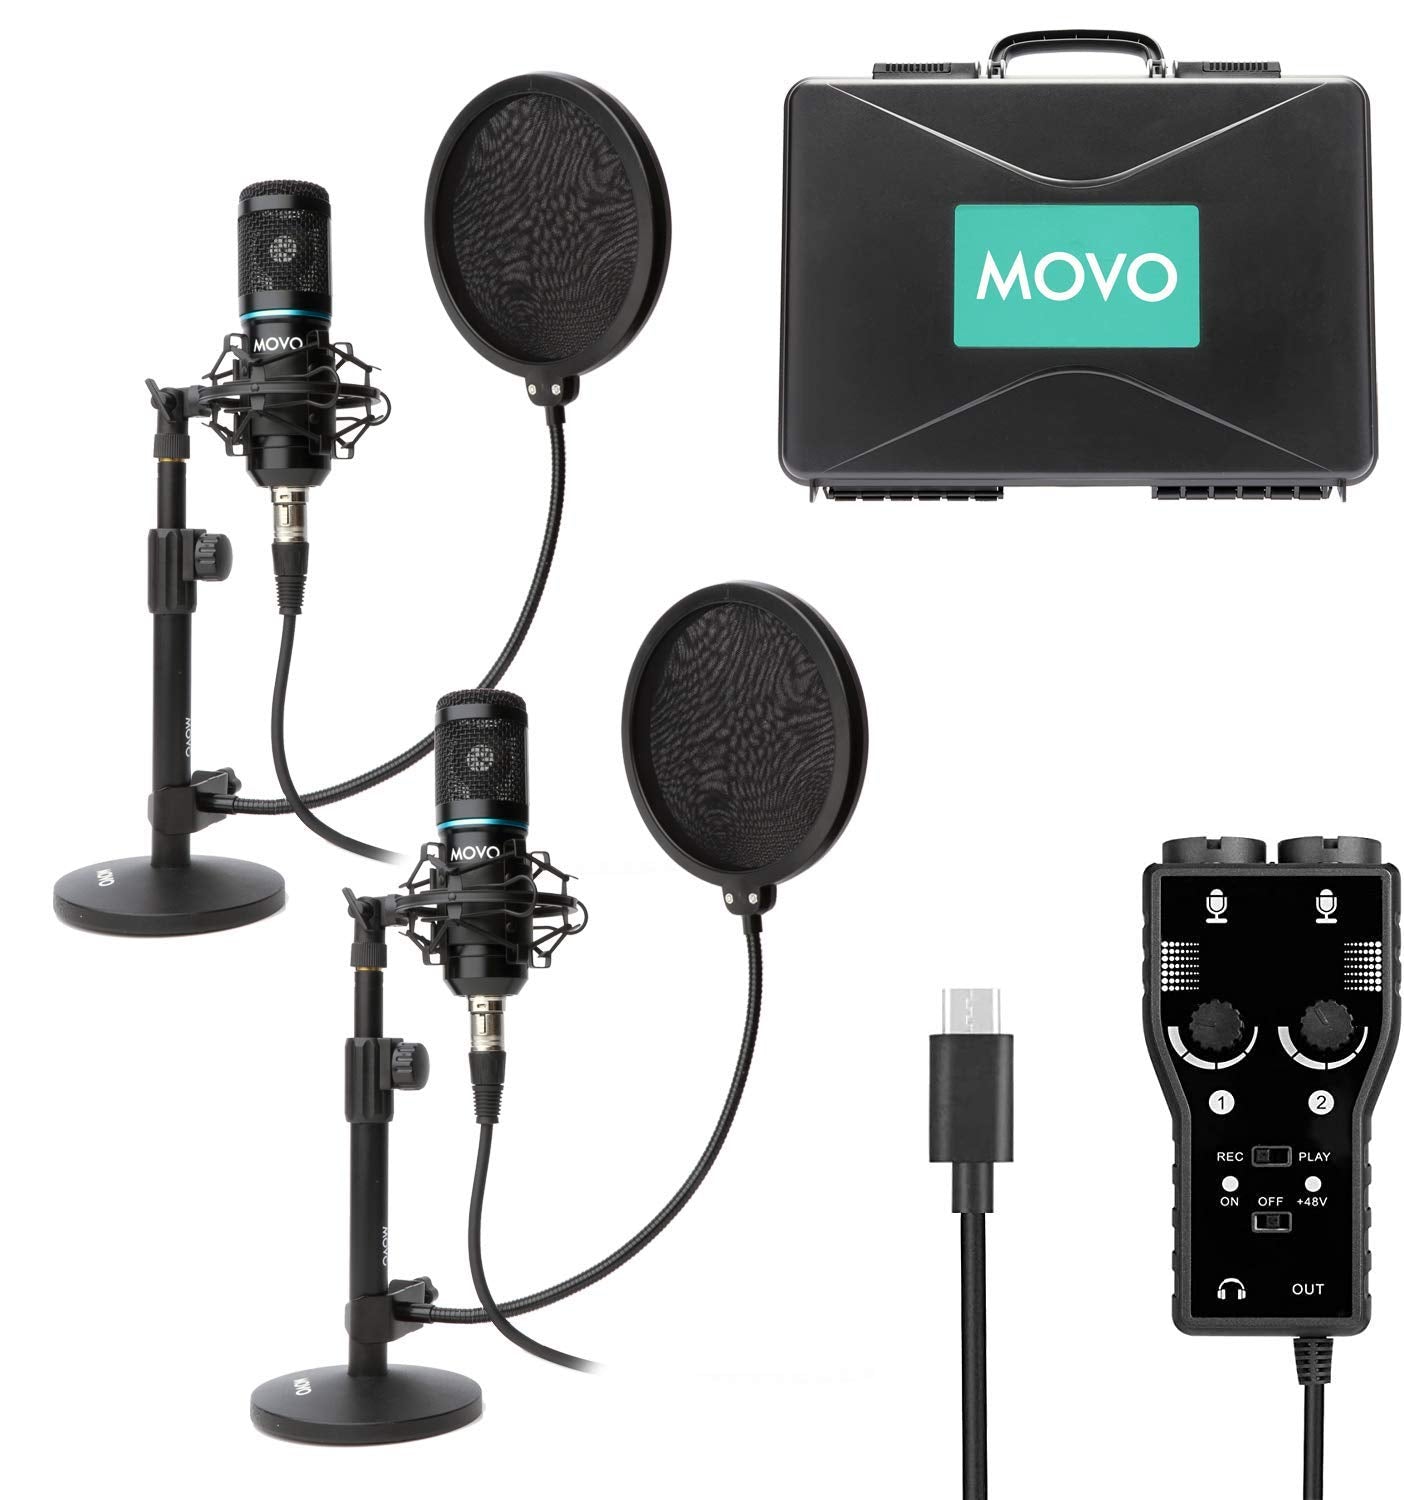 Movo Smartphone Podcast Recording Bundle Kit - 2 Pack Condenser Microphones, 2 Desktop Mic Stands, 2 Pop Filters, 2-Channel XLR Interface w/USB Type-C Output - Compatible with Android, Samsung Galaxy  - Like New